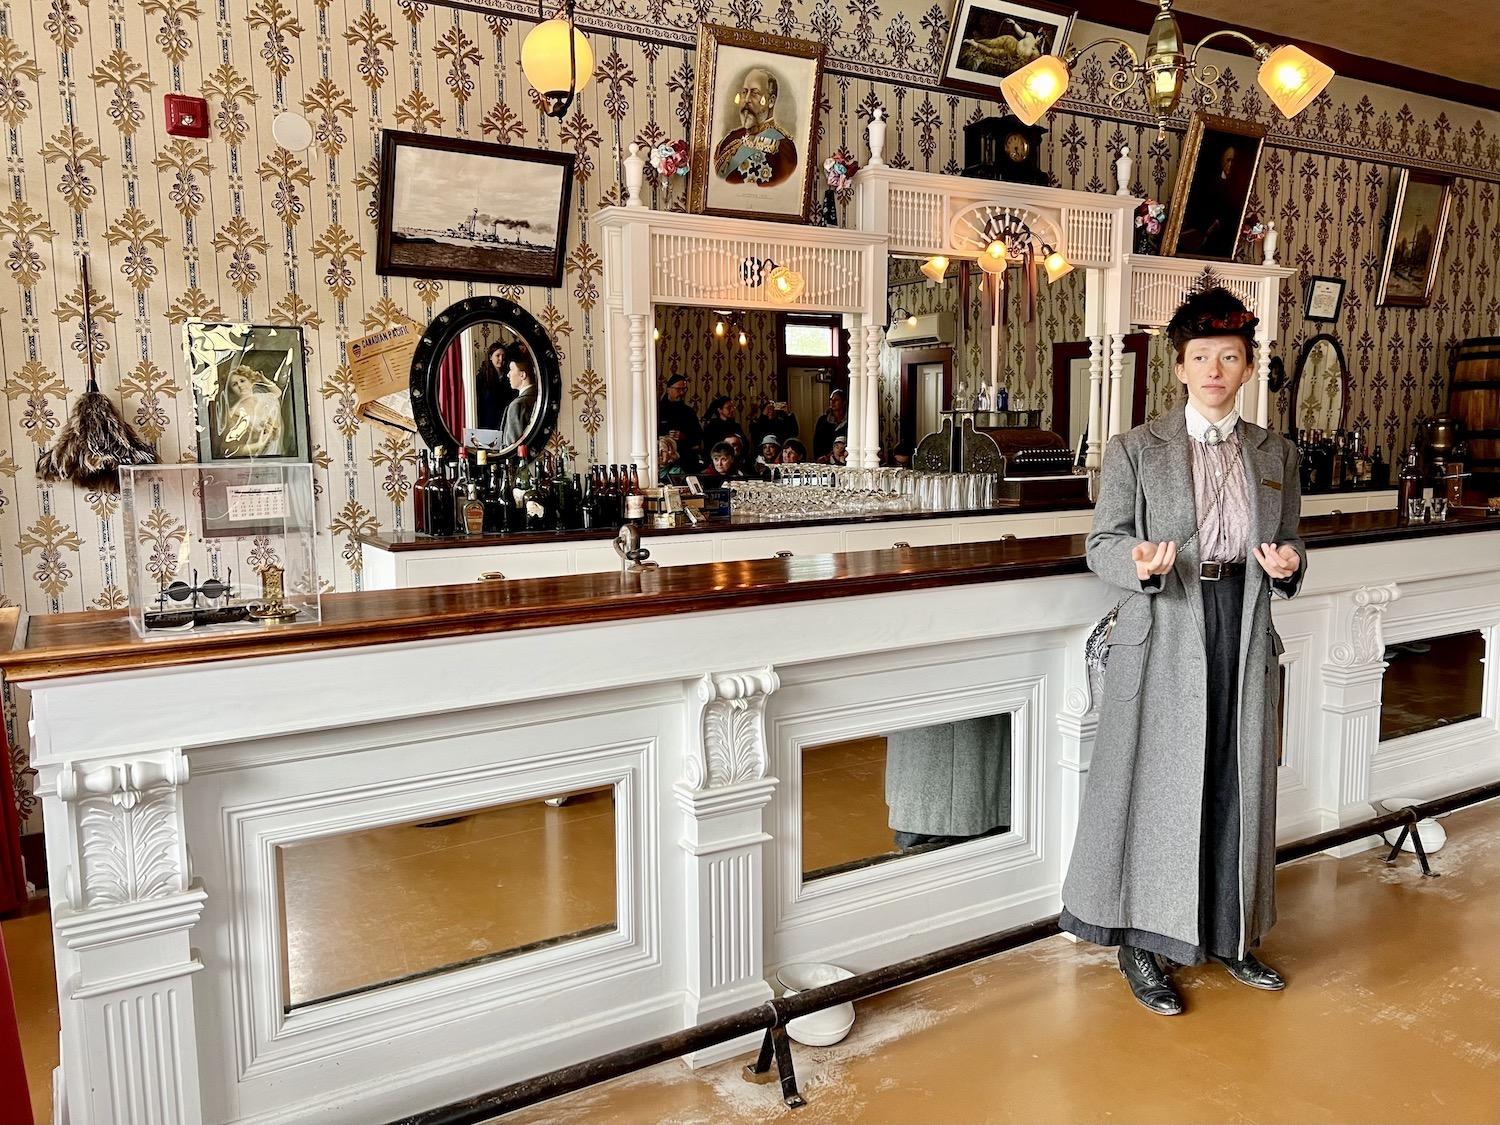 Dressed in period costume, Parks Canada heritage interpreter Miriam Behman leads a tour through buildings that form the Dawson Historical Complex National Historic Site.